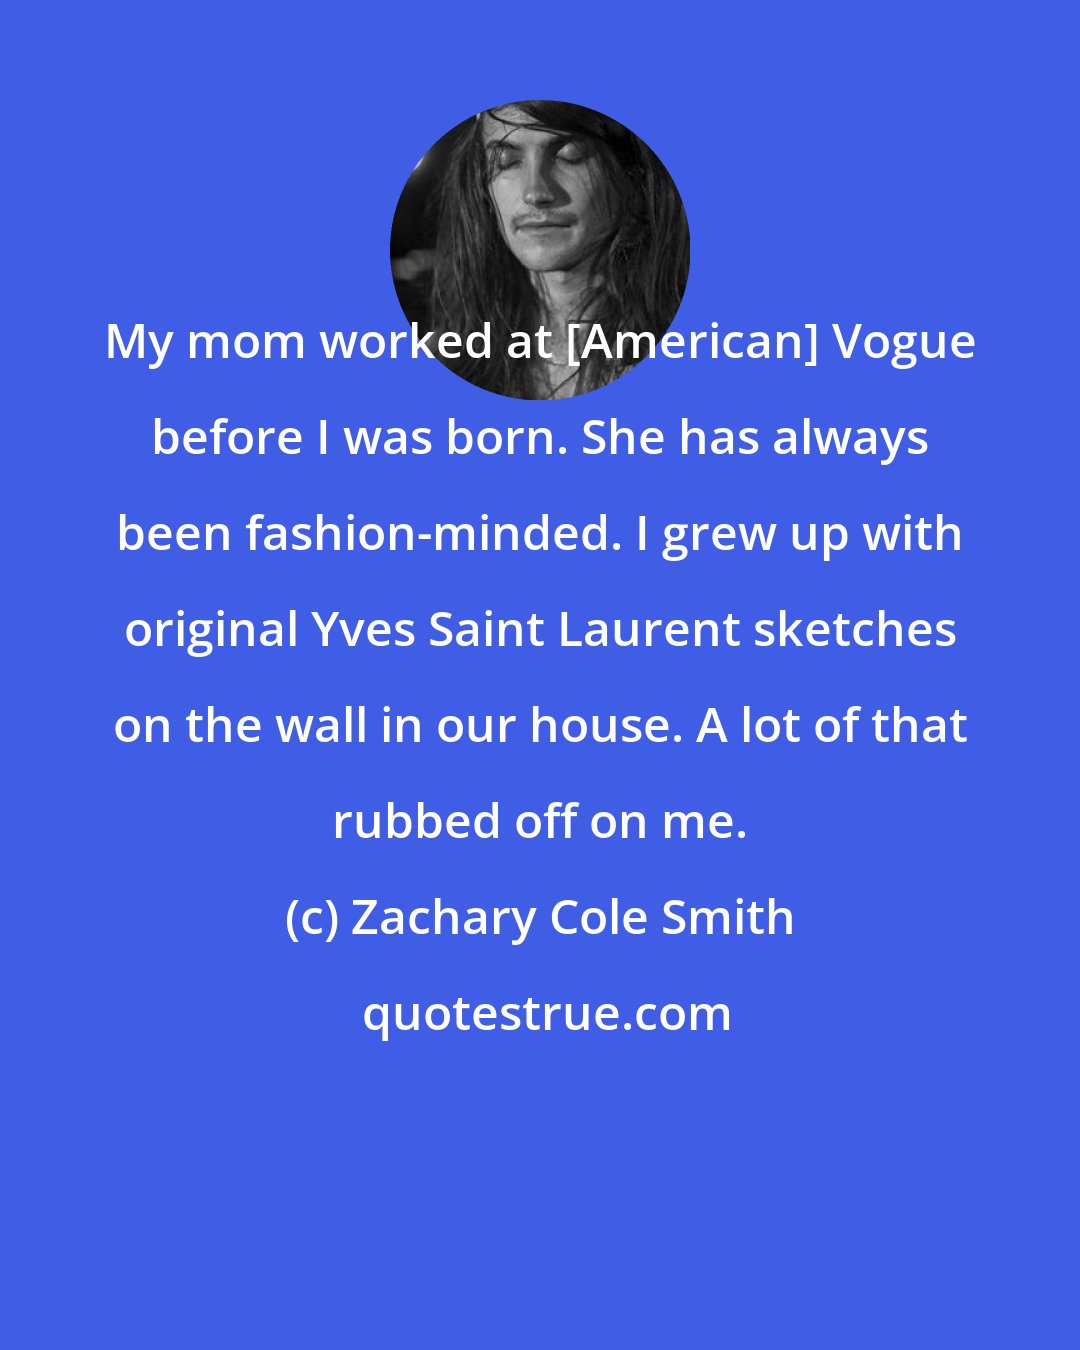 Zachary Cole Smith: My mom worked at [American] Vogue before I was born. She has always been fashion-minded. I grew up with original Yves Saint Laurent sketches on the wall in our house. A lot of that rubbed off on me.